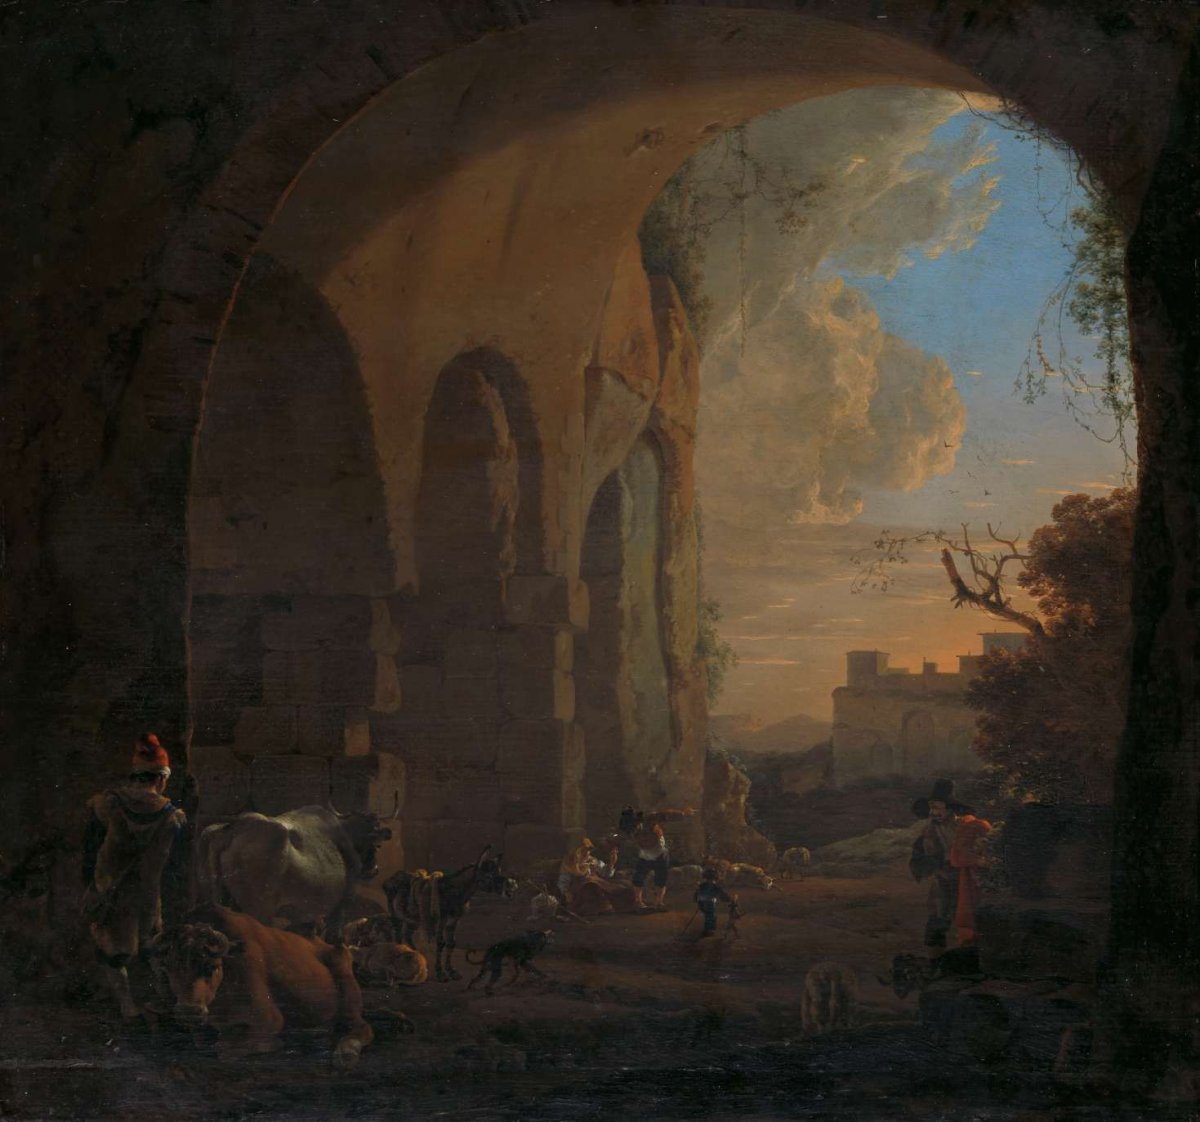 Drovers with Cattle under an Arch of the Colosseum in Rome, Jan Asselijn, 1640 - 1652